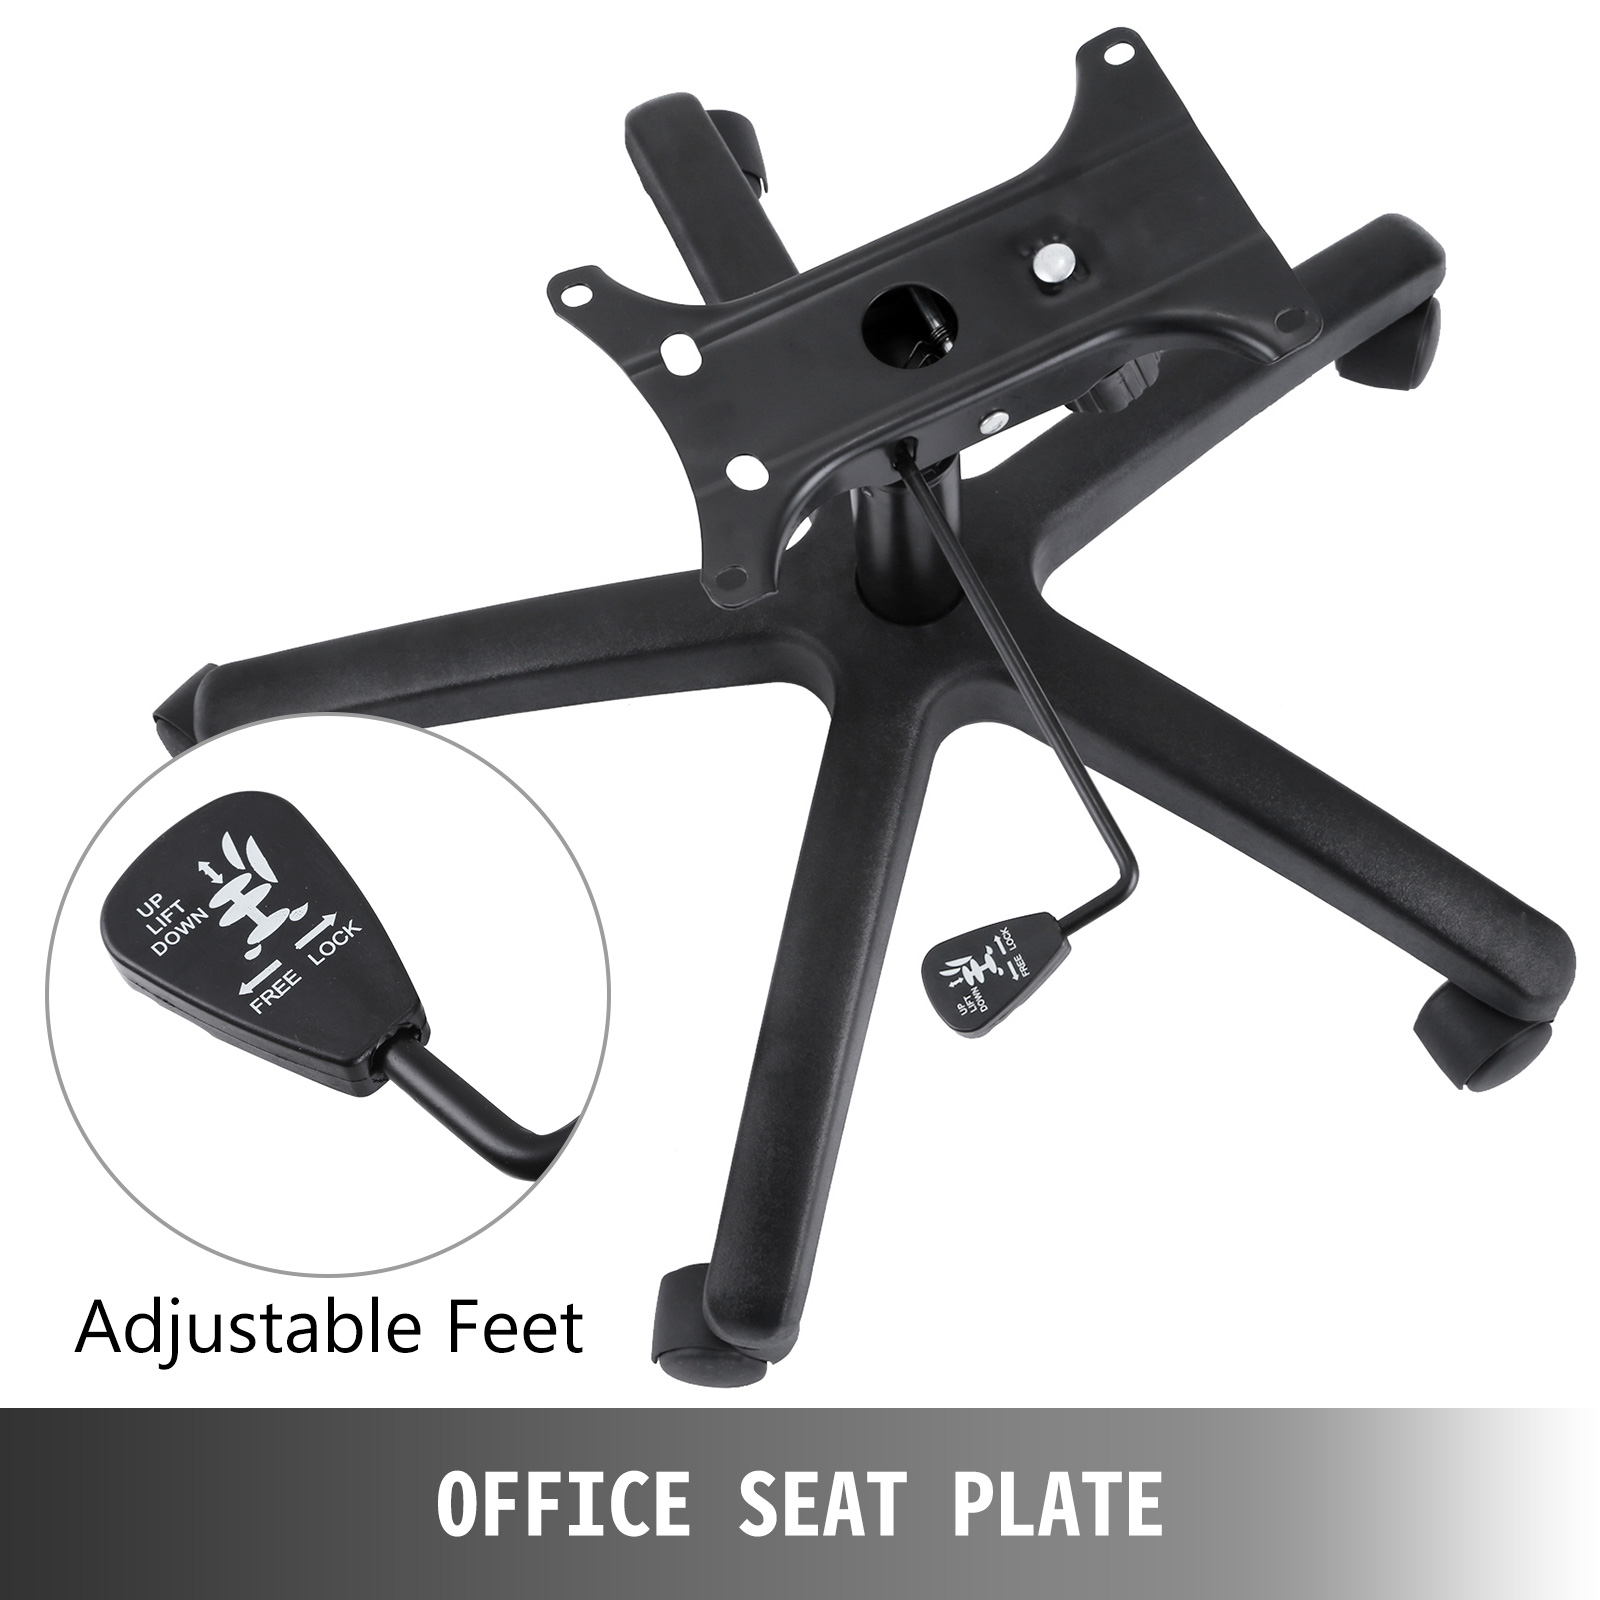 Heavy Duty Chair Parts to Repair Your Swivel Chair Bottom Universal Standard Size Black Office Chair Base Replacement Strong Aluminum Metal Legs Help Your Desk Chair Last a Lifetime 